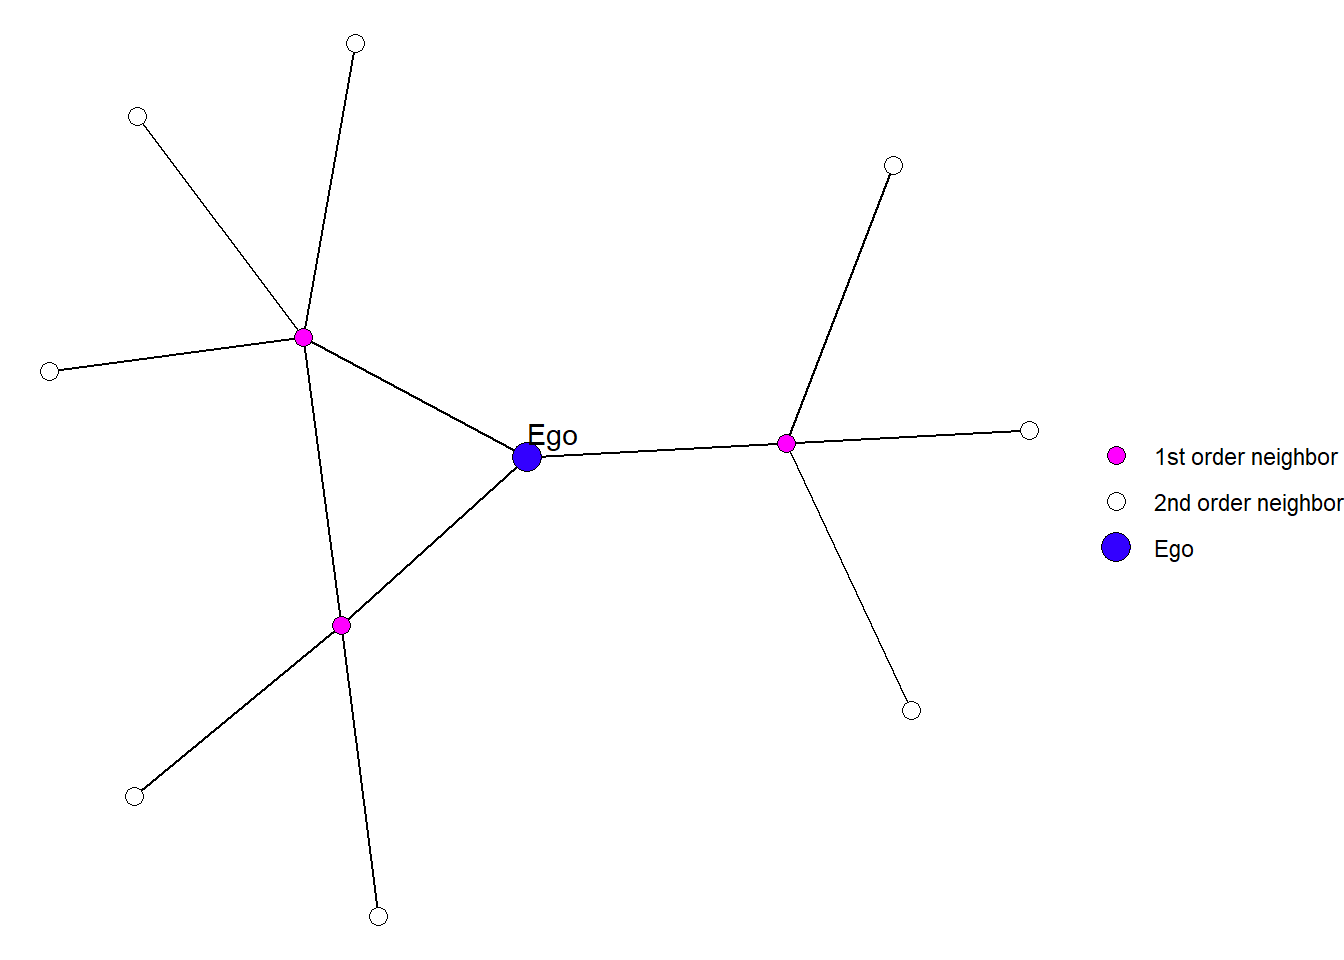 An example of an egocentric network.